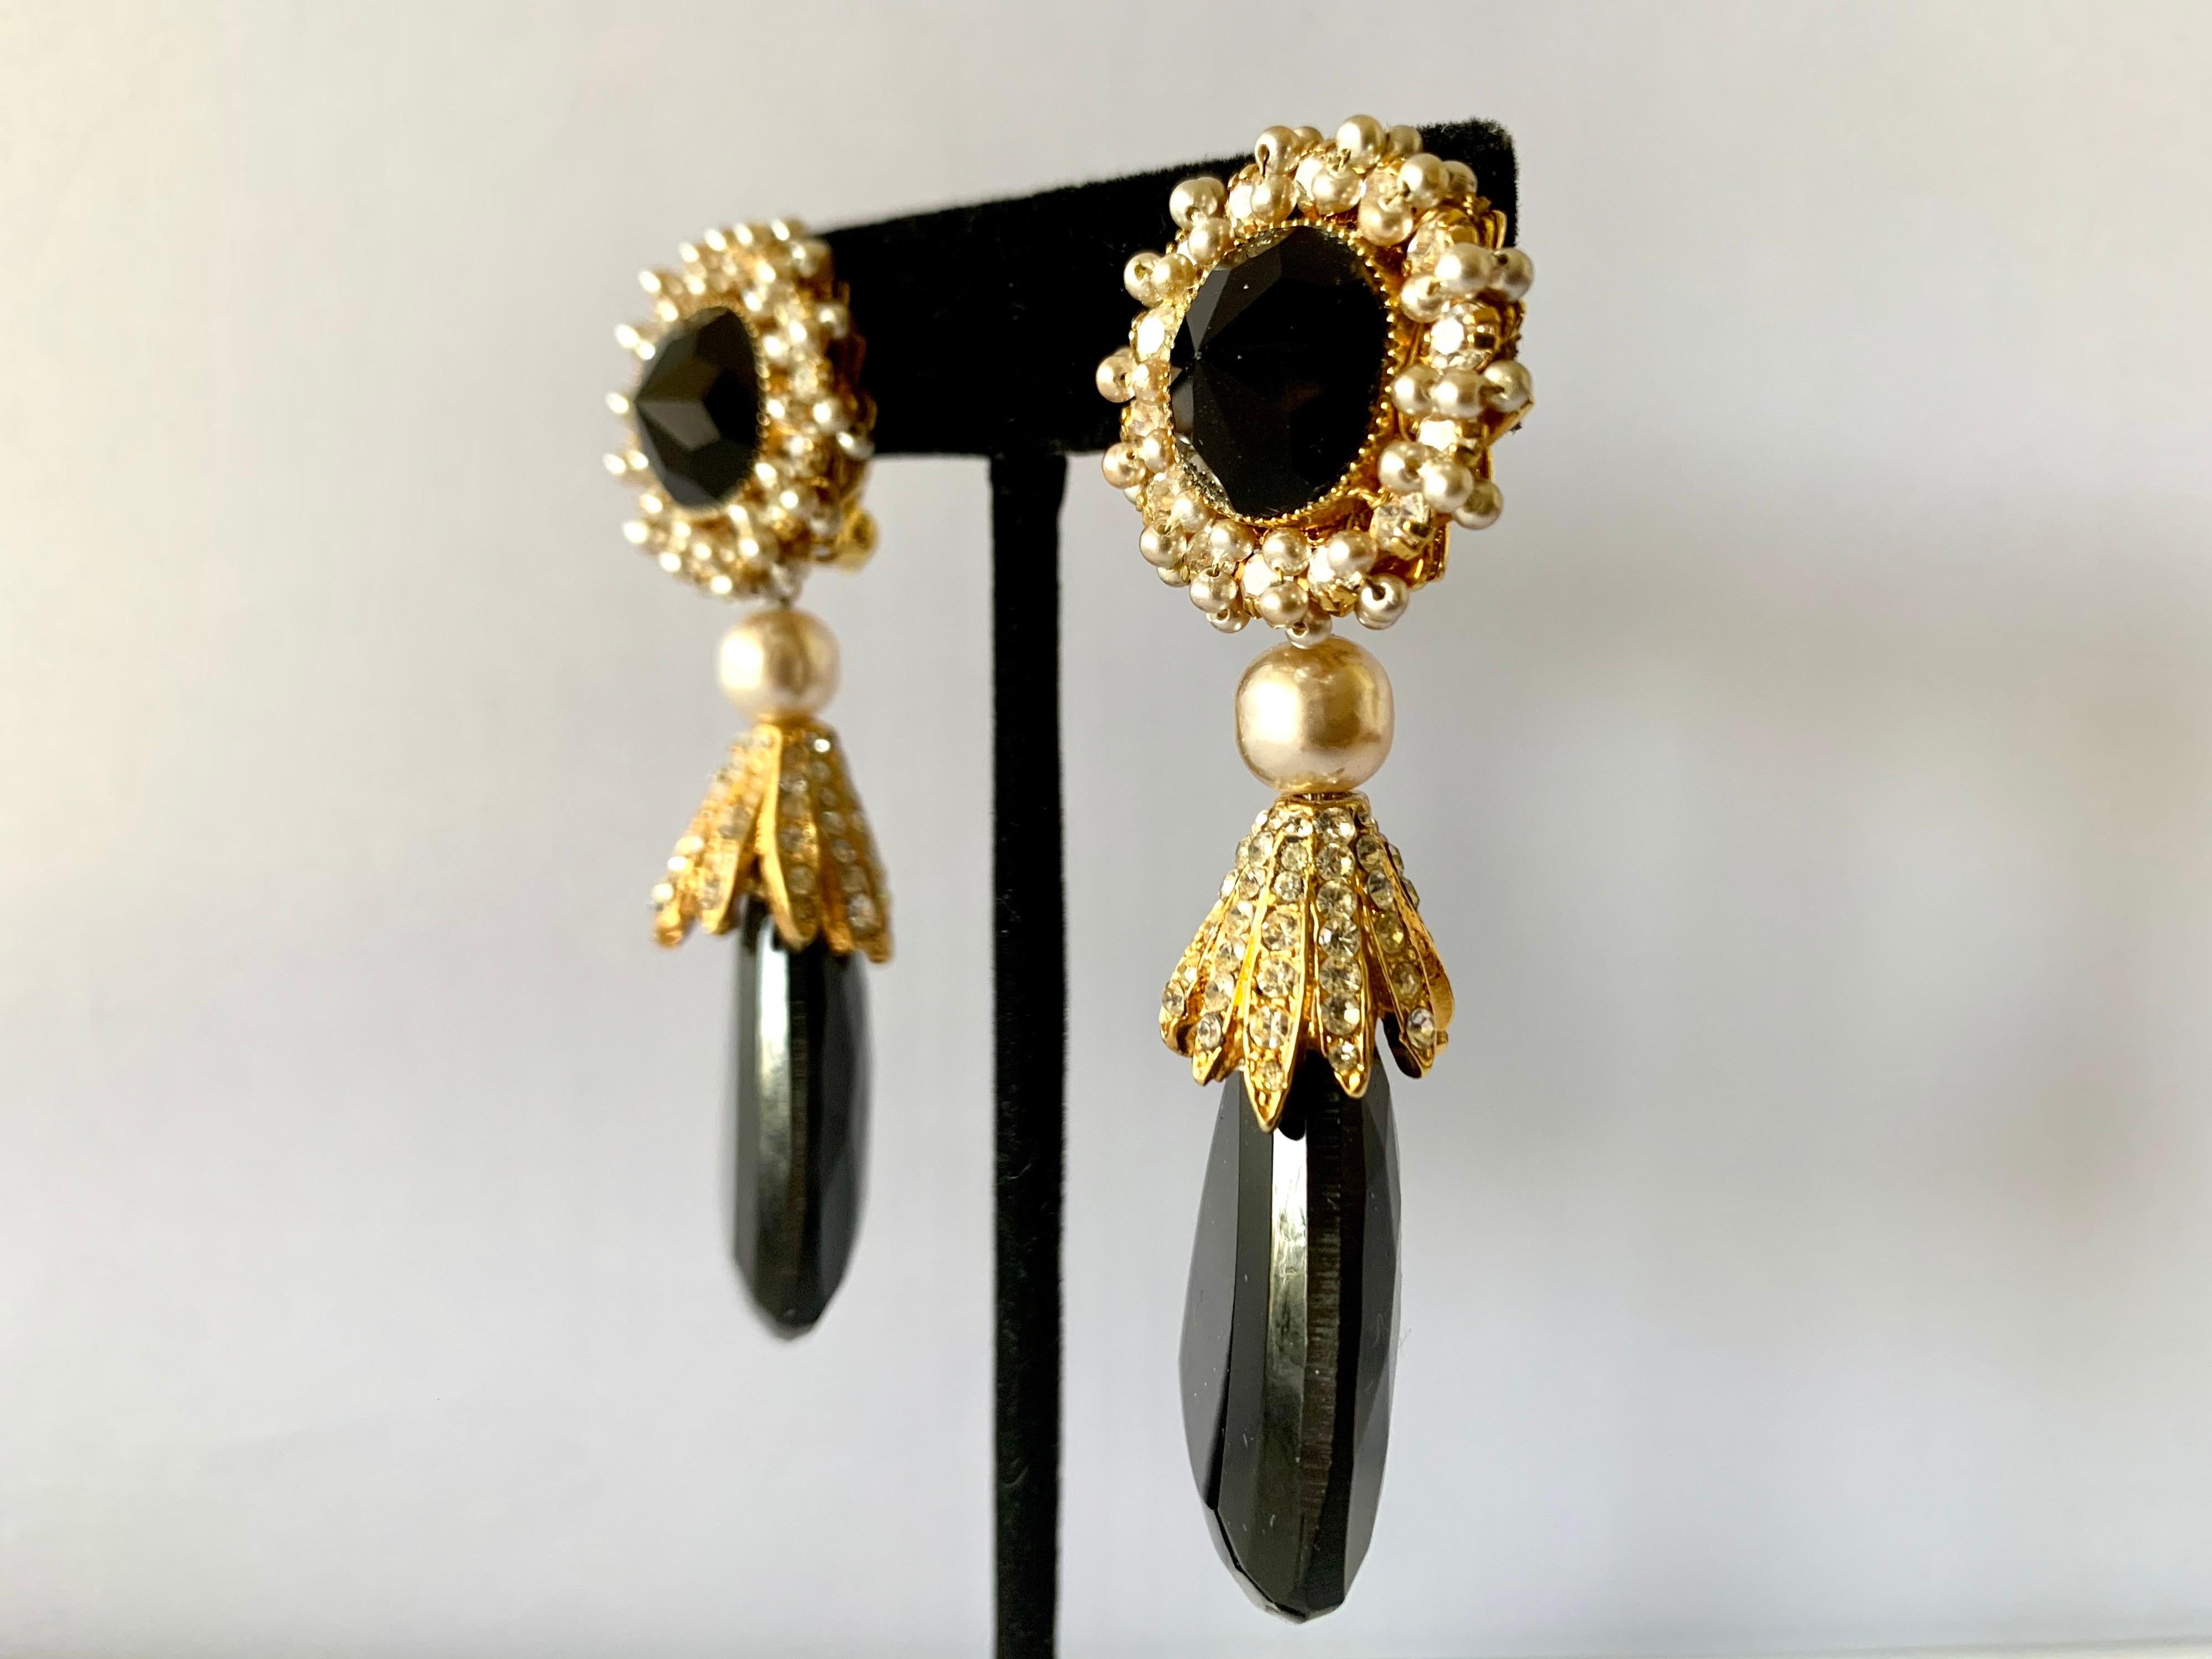 Vintage earrings by William de Lillo - comprised out of gilt metal, intricately beaded with pearls and accented by rhinestones and large faceted glass beads. Signed de Lillo, circa 1970s.